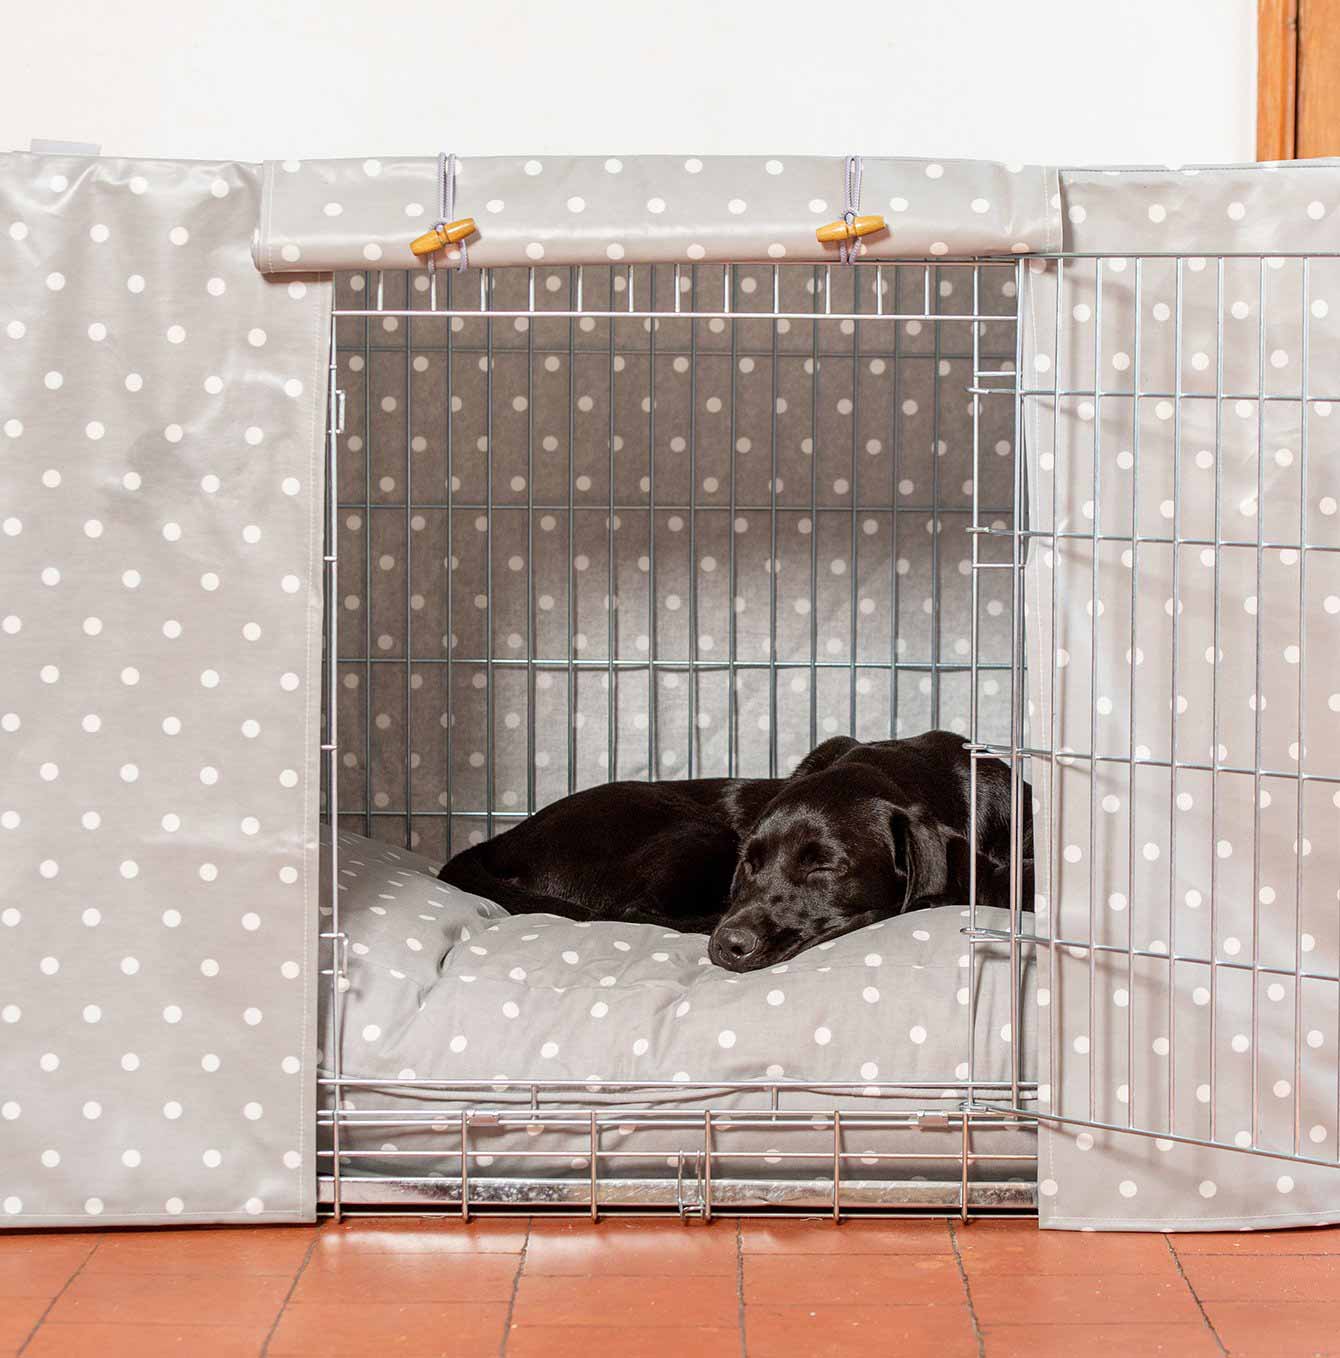 Luxury Heavy Duty Dog Crate, In Stunning Grey Spot Oil Cloth Crate Set, The Perfect Dog Crate Set For Building The Ultimate Pet Den! Dog Crate Cover Available To Personalise at Lords & Labradors